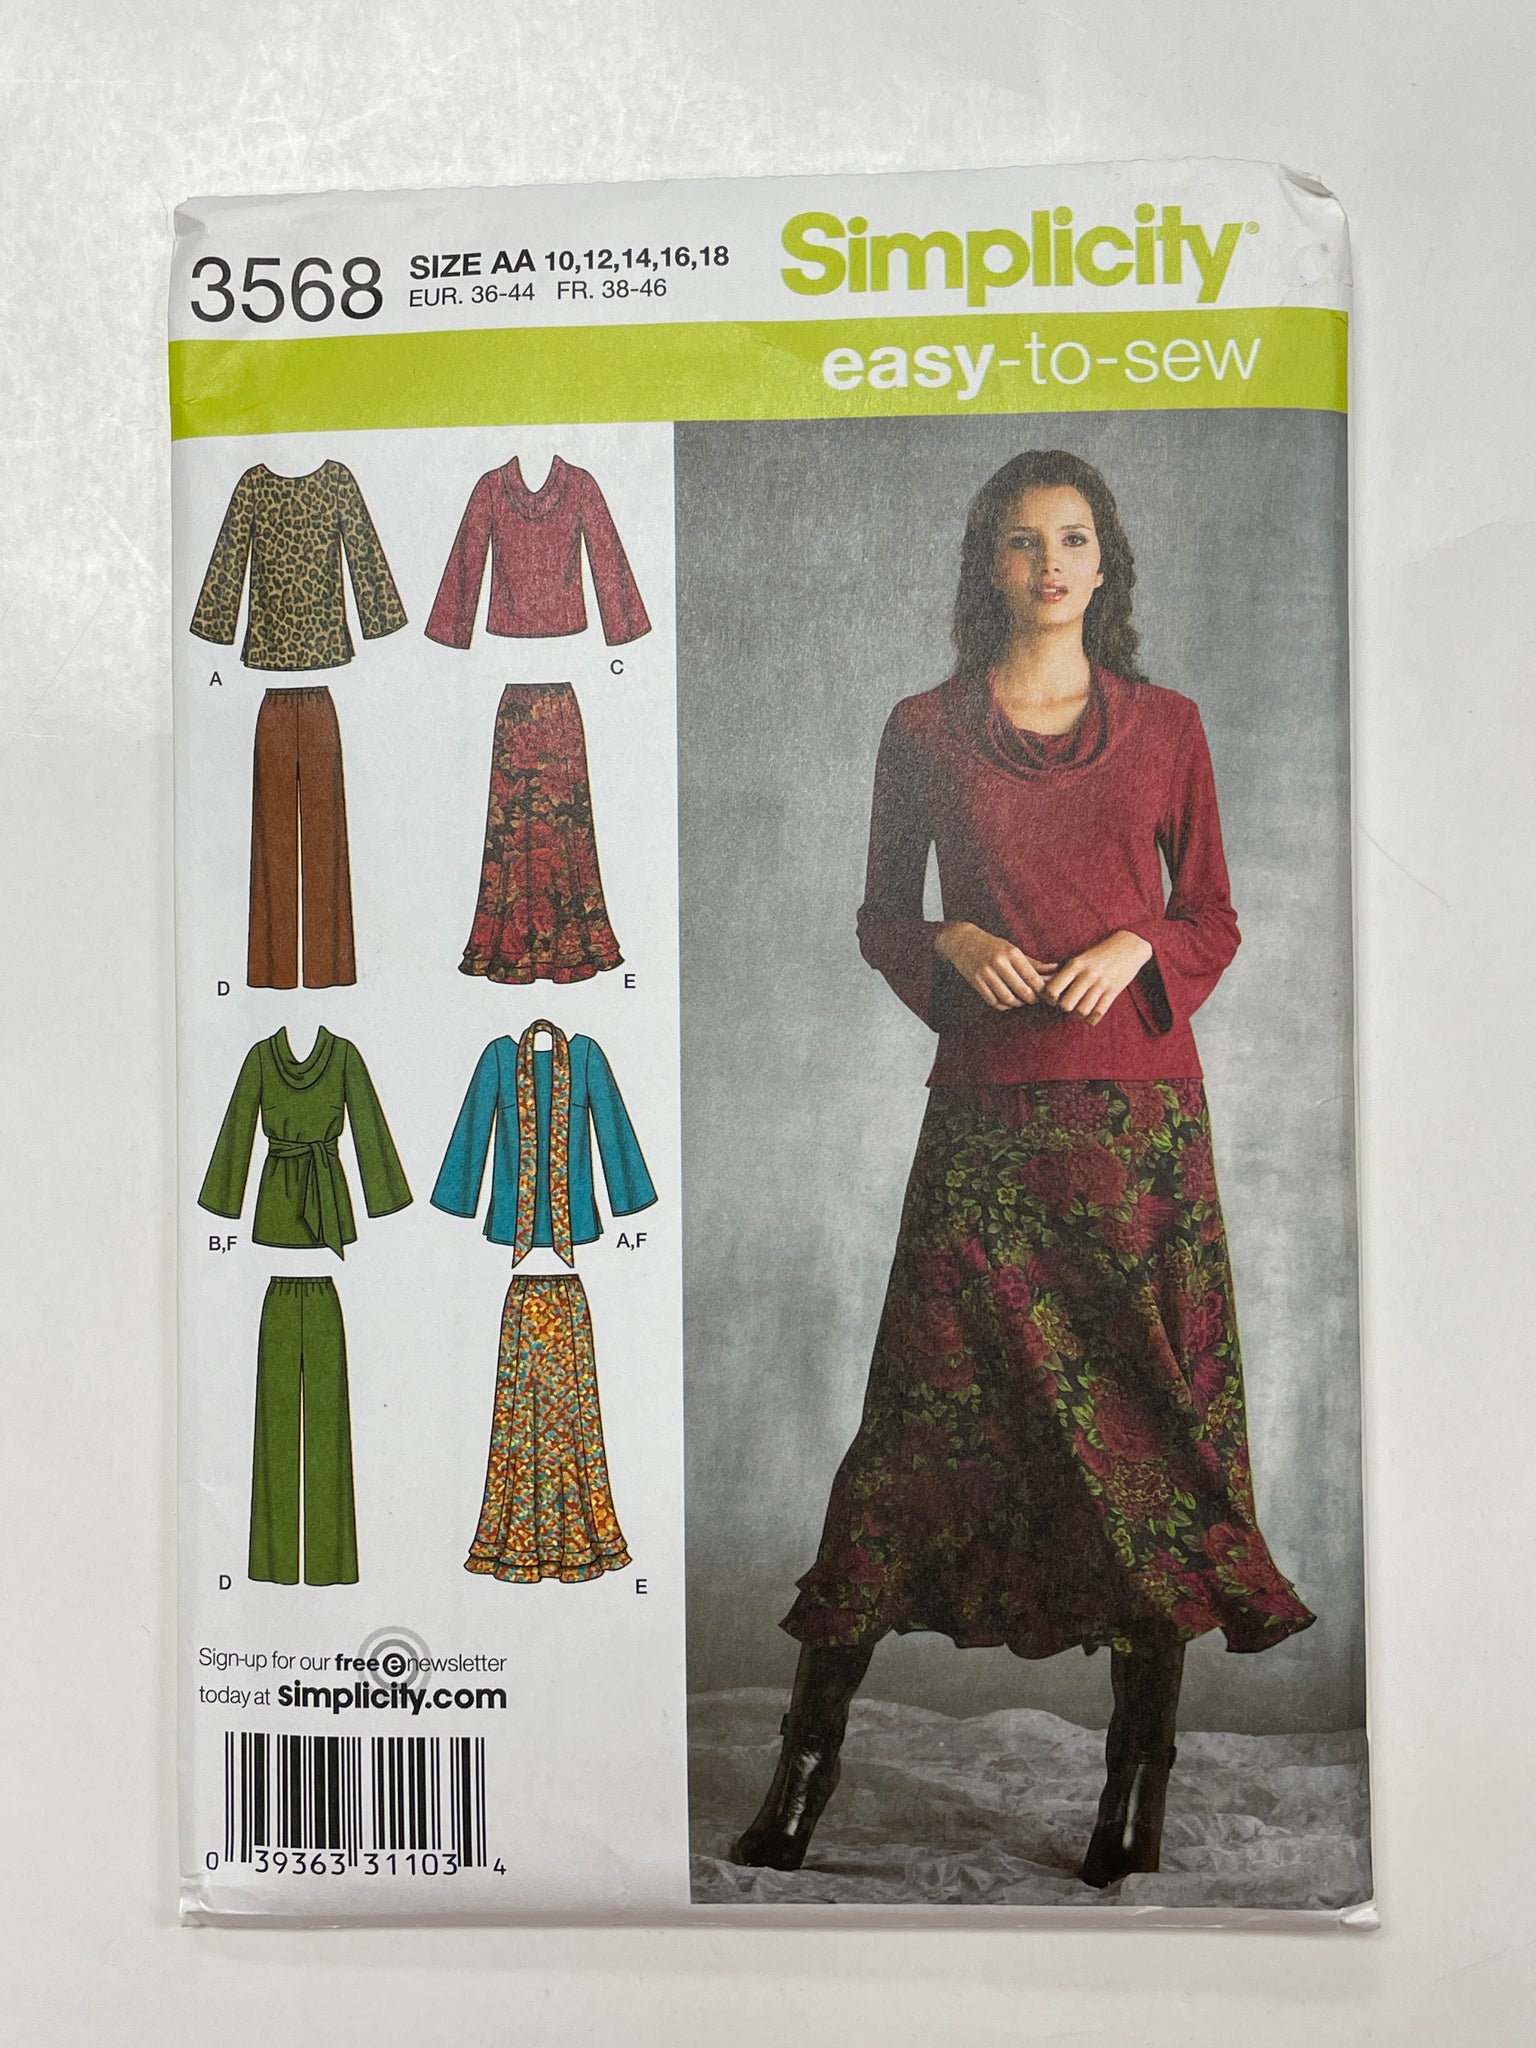 2007 Simplicity 3568 Sewing Pattern - Tops, Skirt, Pants and Scarf FACTORY FOLDED